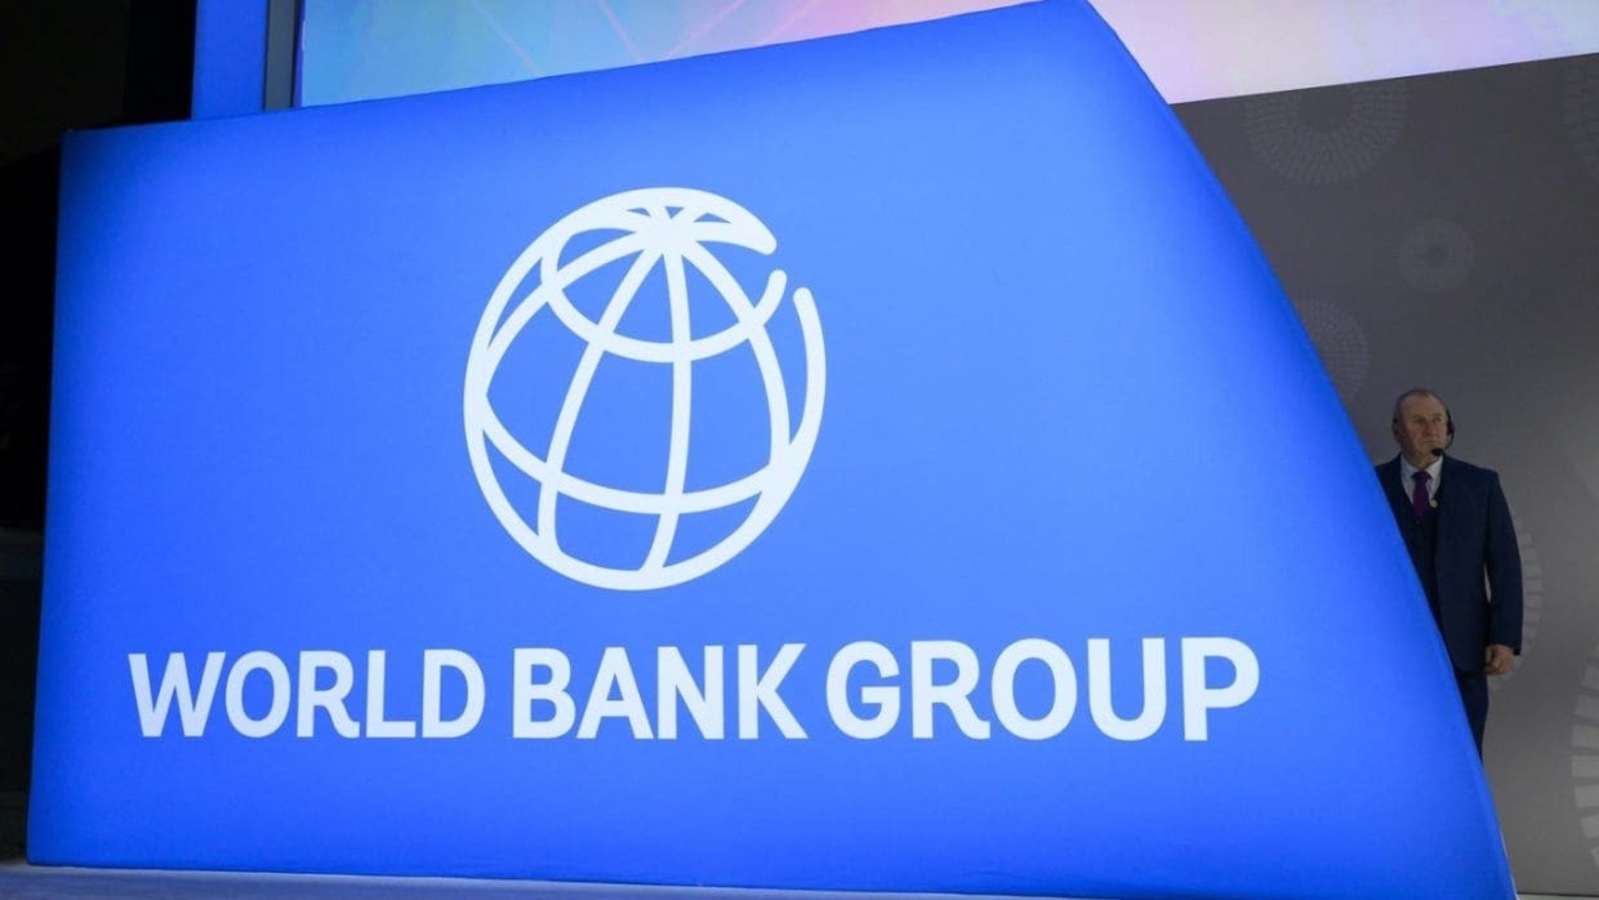 World Bank to discontinue ‘Doing Business’ reports after irregularities